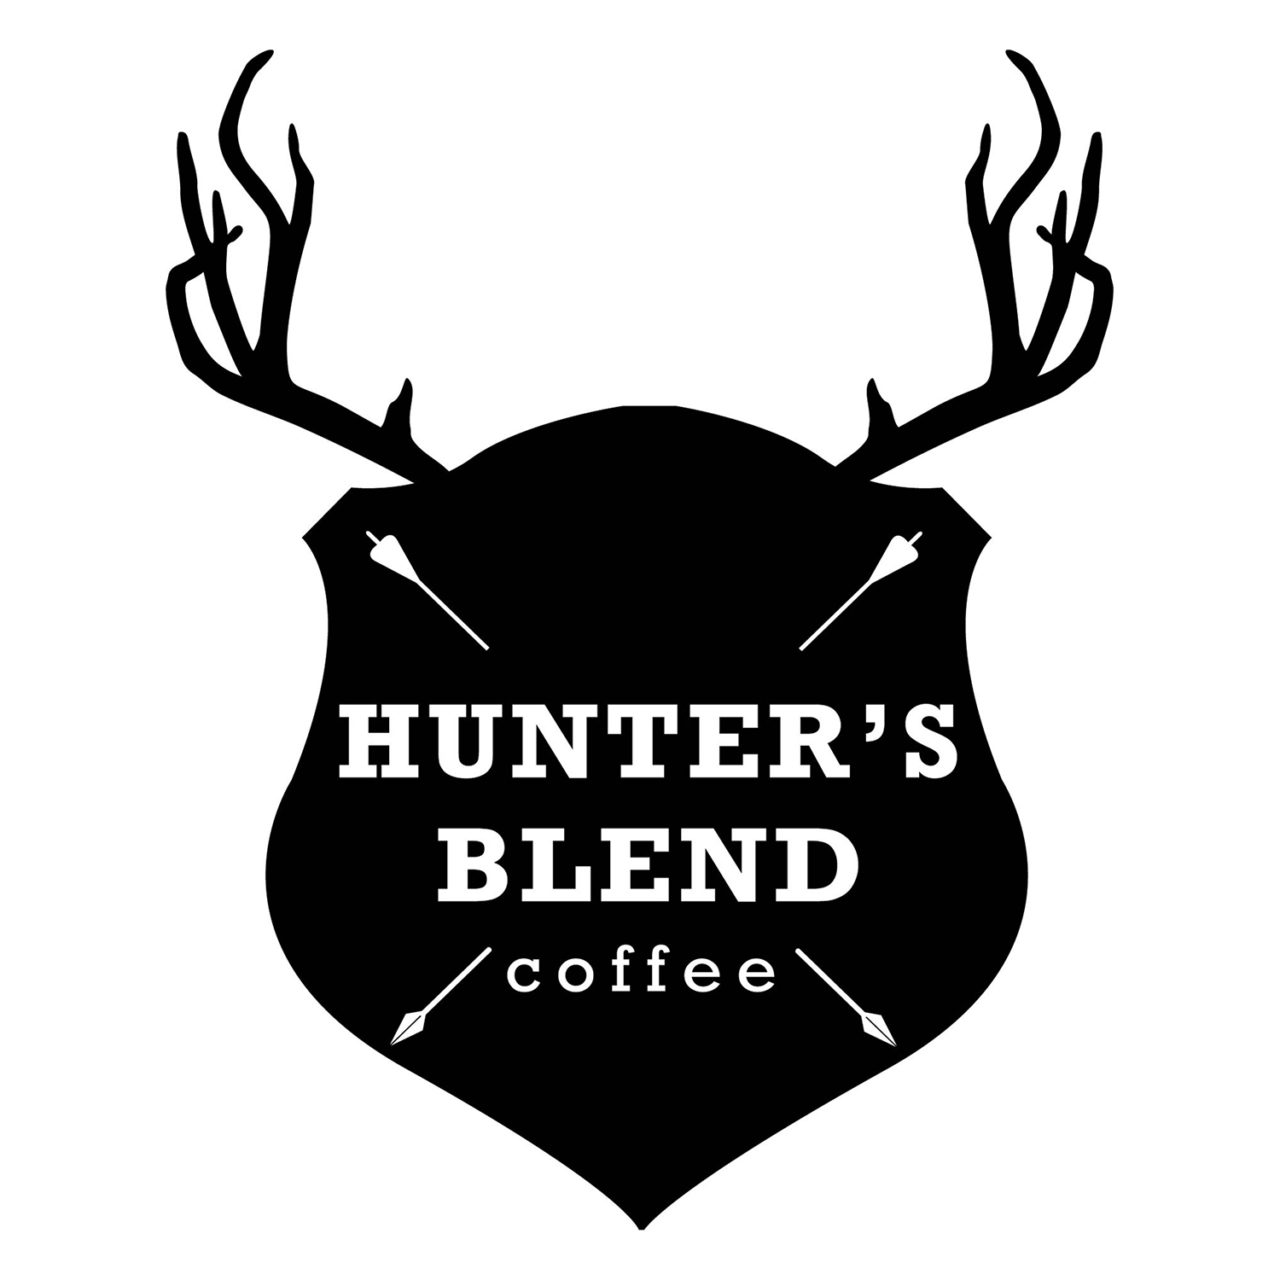 HUNTER’S BLEND COFFEE NOW AVAILABLE IN SINGLE SERVING PODS